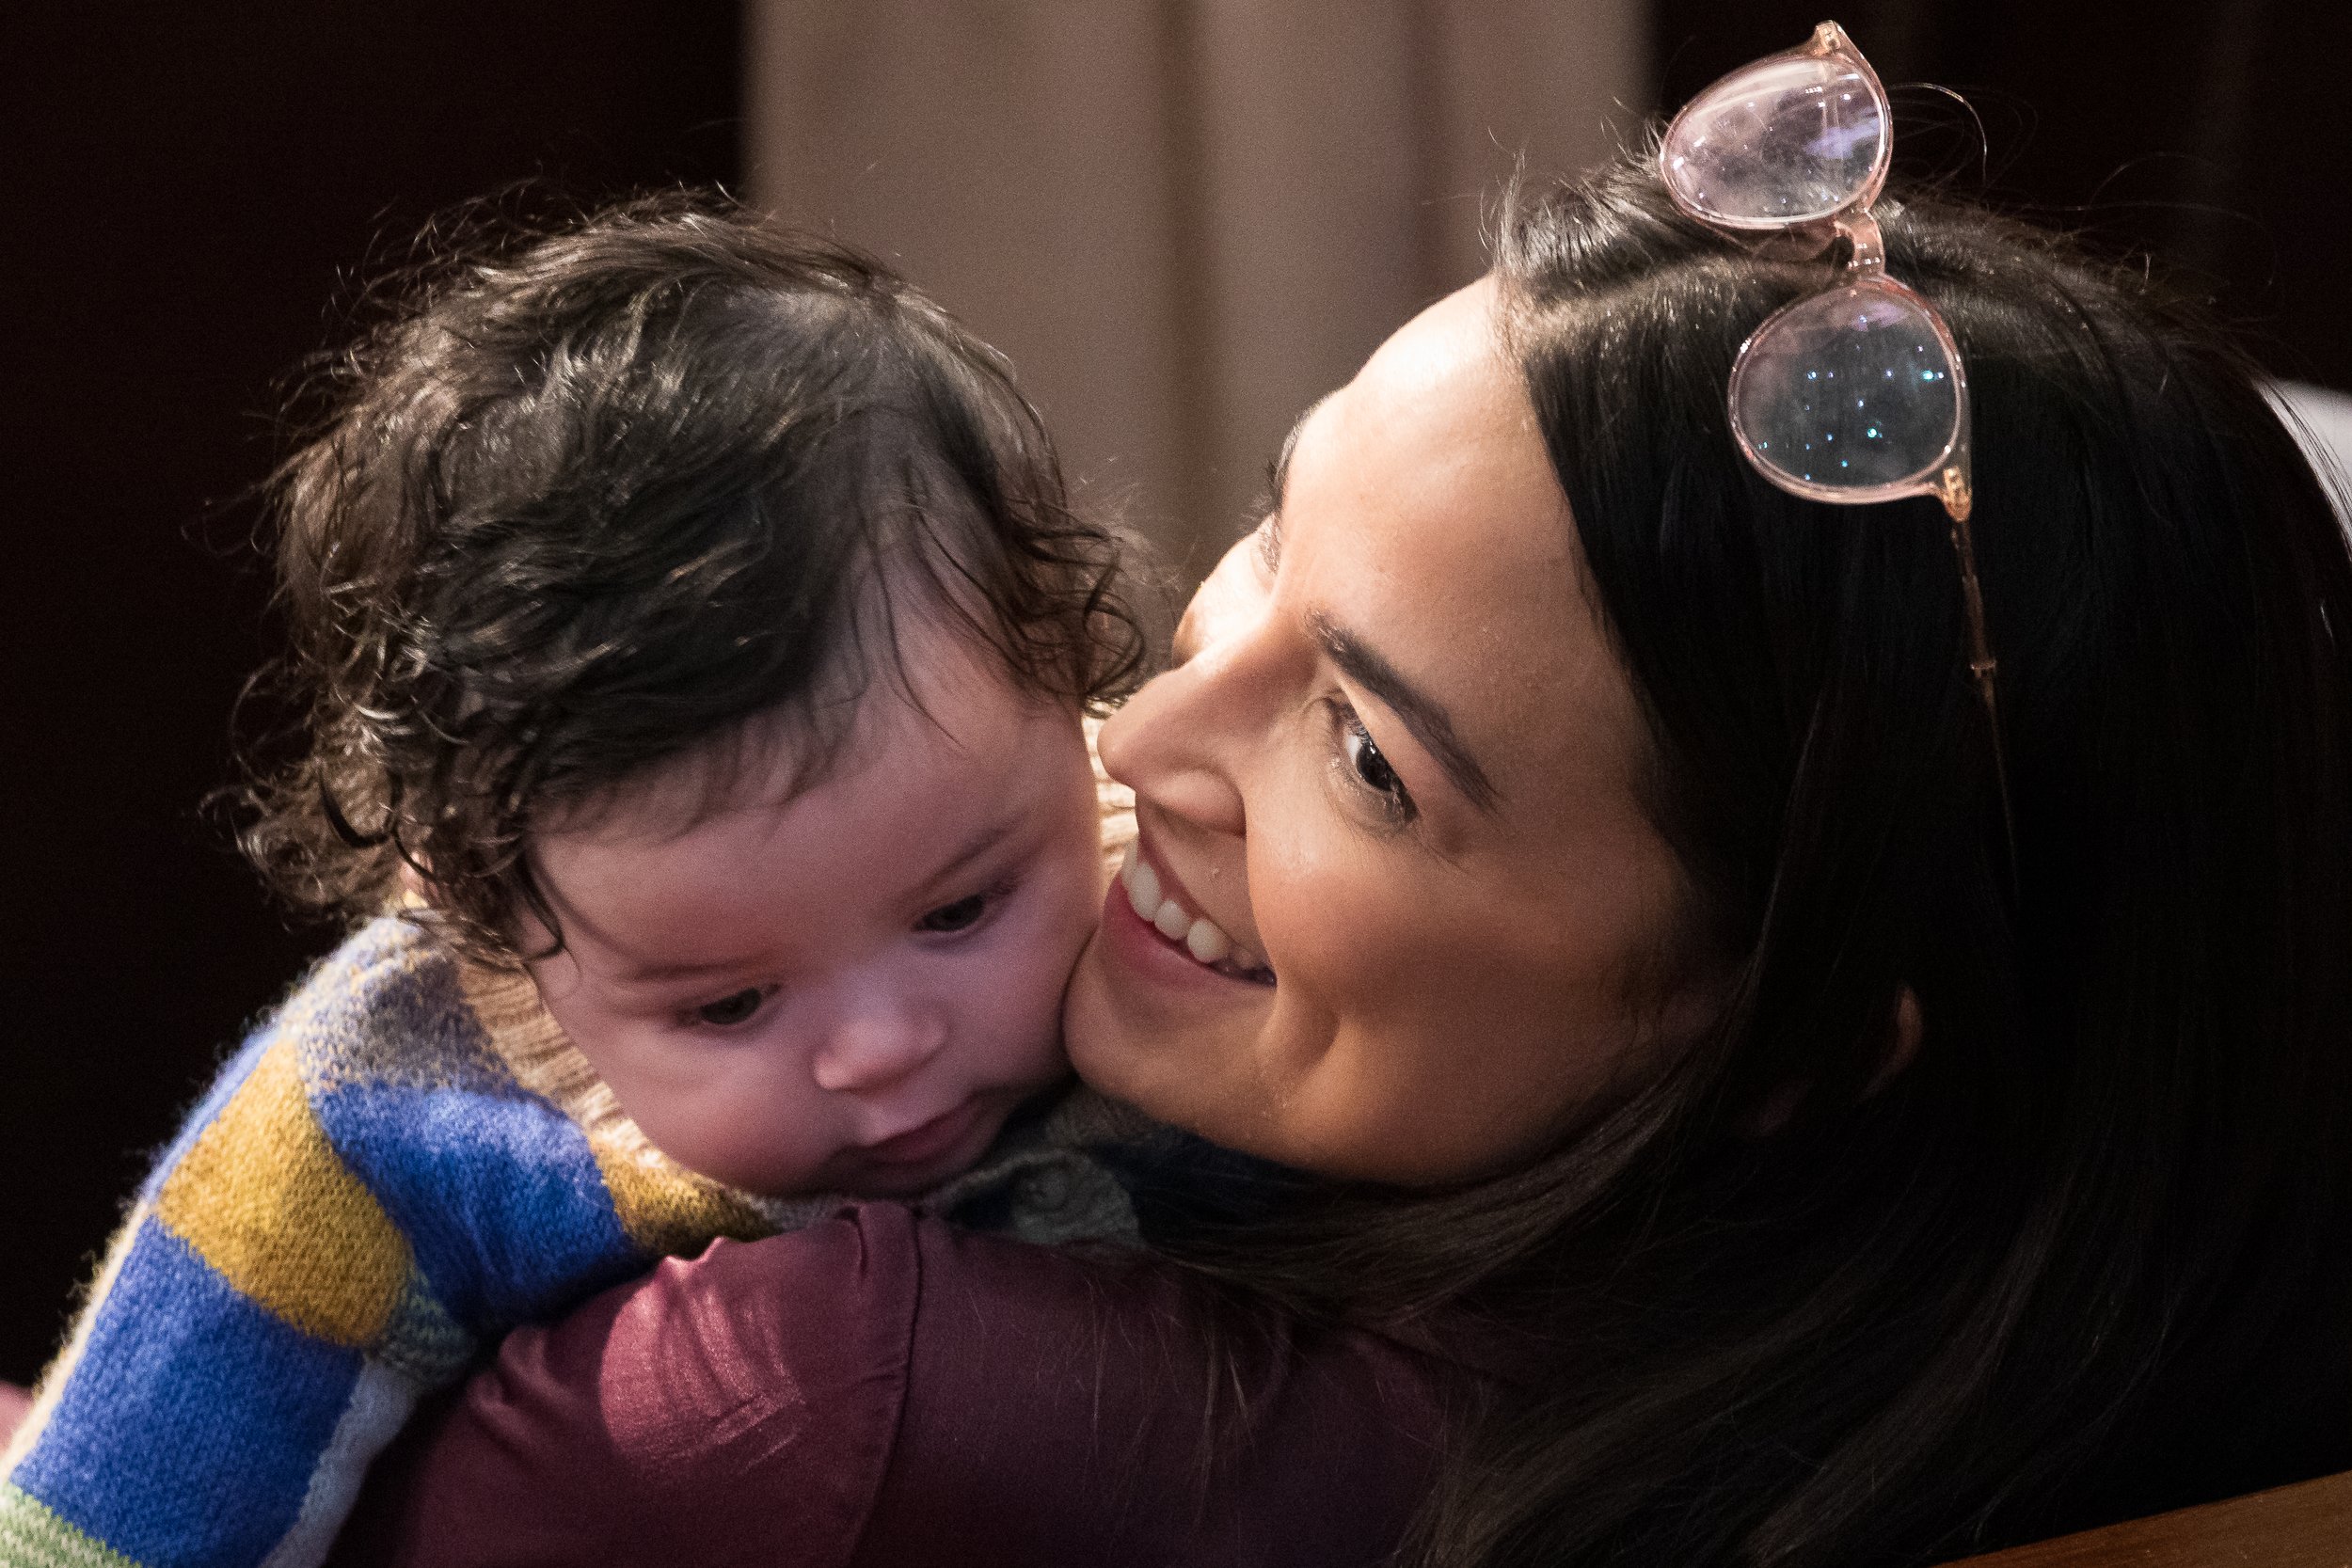  Rep. Alexandria Ocasio-Cortez (D-N.Y.) holds California Democratic Rep. Jimmy Gomez's son, Hodge, on the House floor during a House speakership election vote at the U.S. Capitol Jan. 5, 2023. 